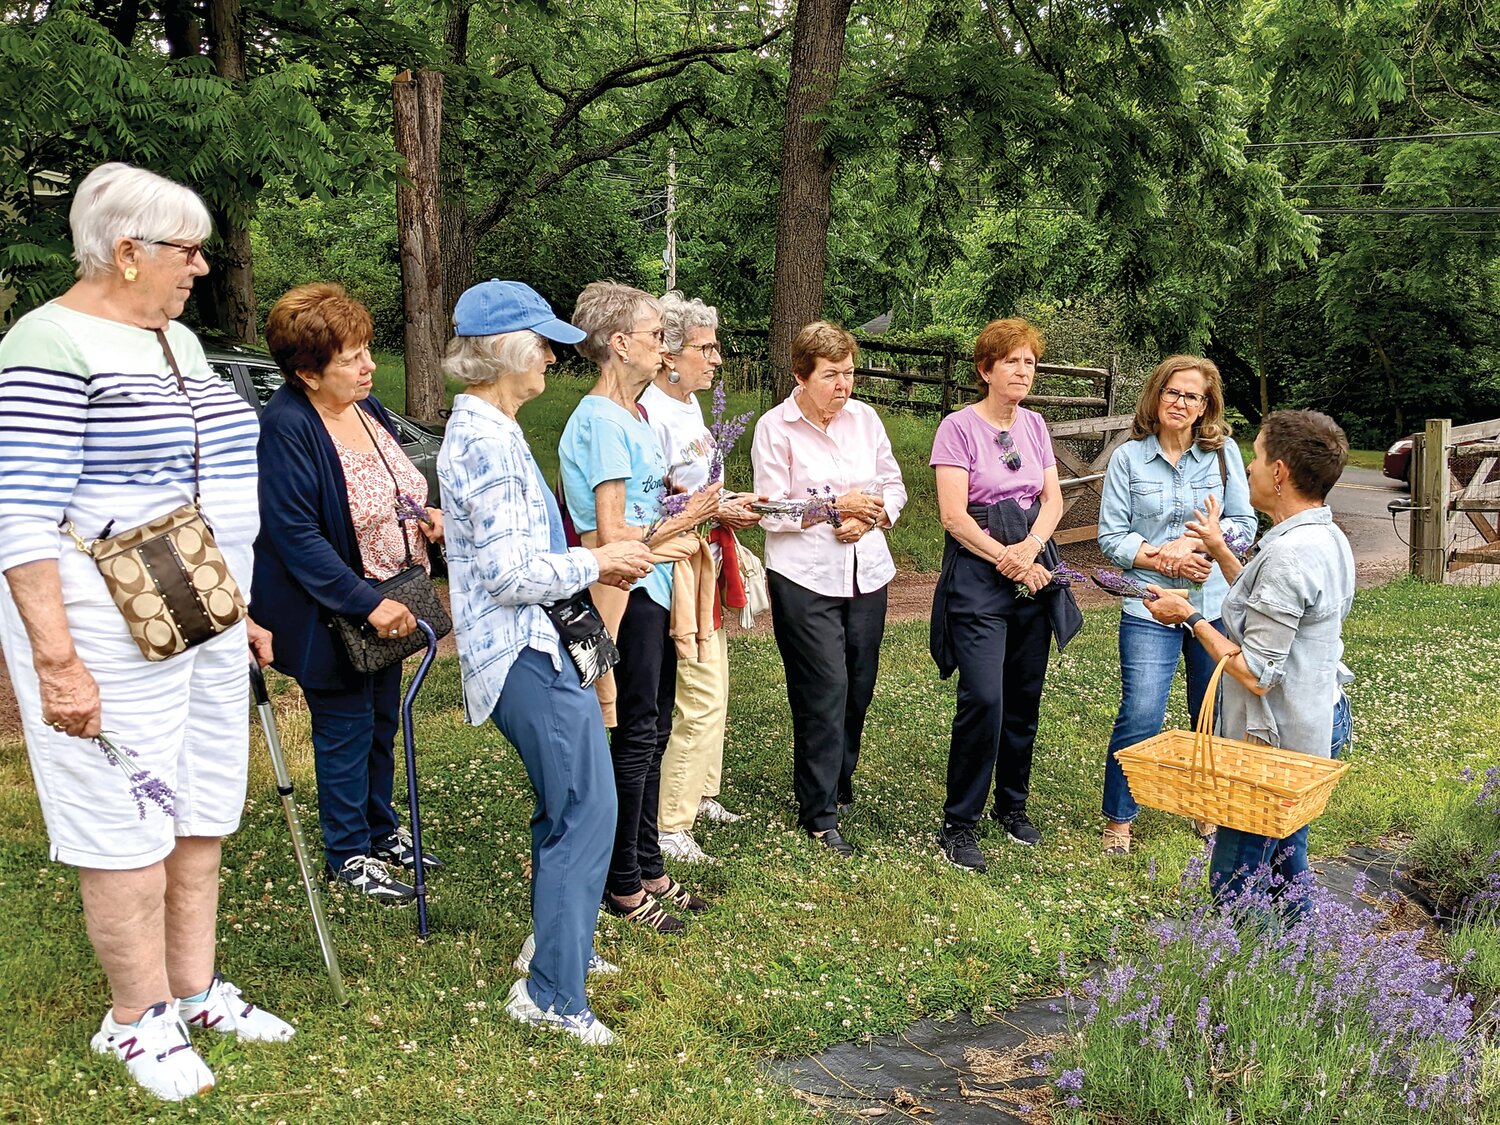 The Ladies of Mt. Carmel enjoyed a picnic at Peace Valley Lavender Farm in warmer weather. Here, they receive an introduction.